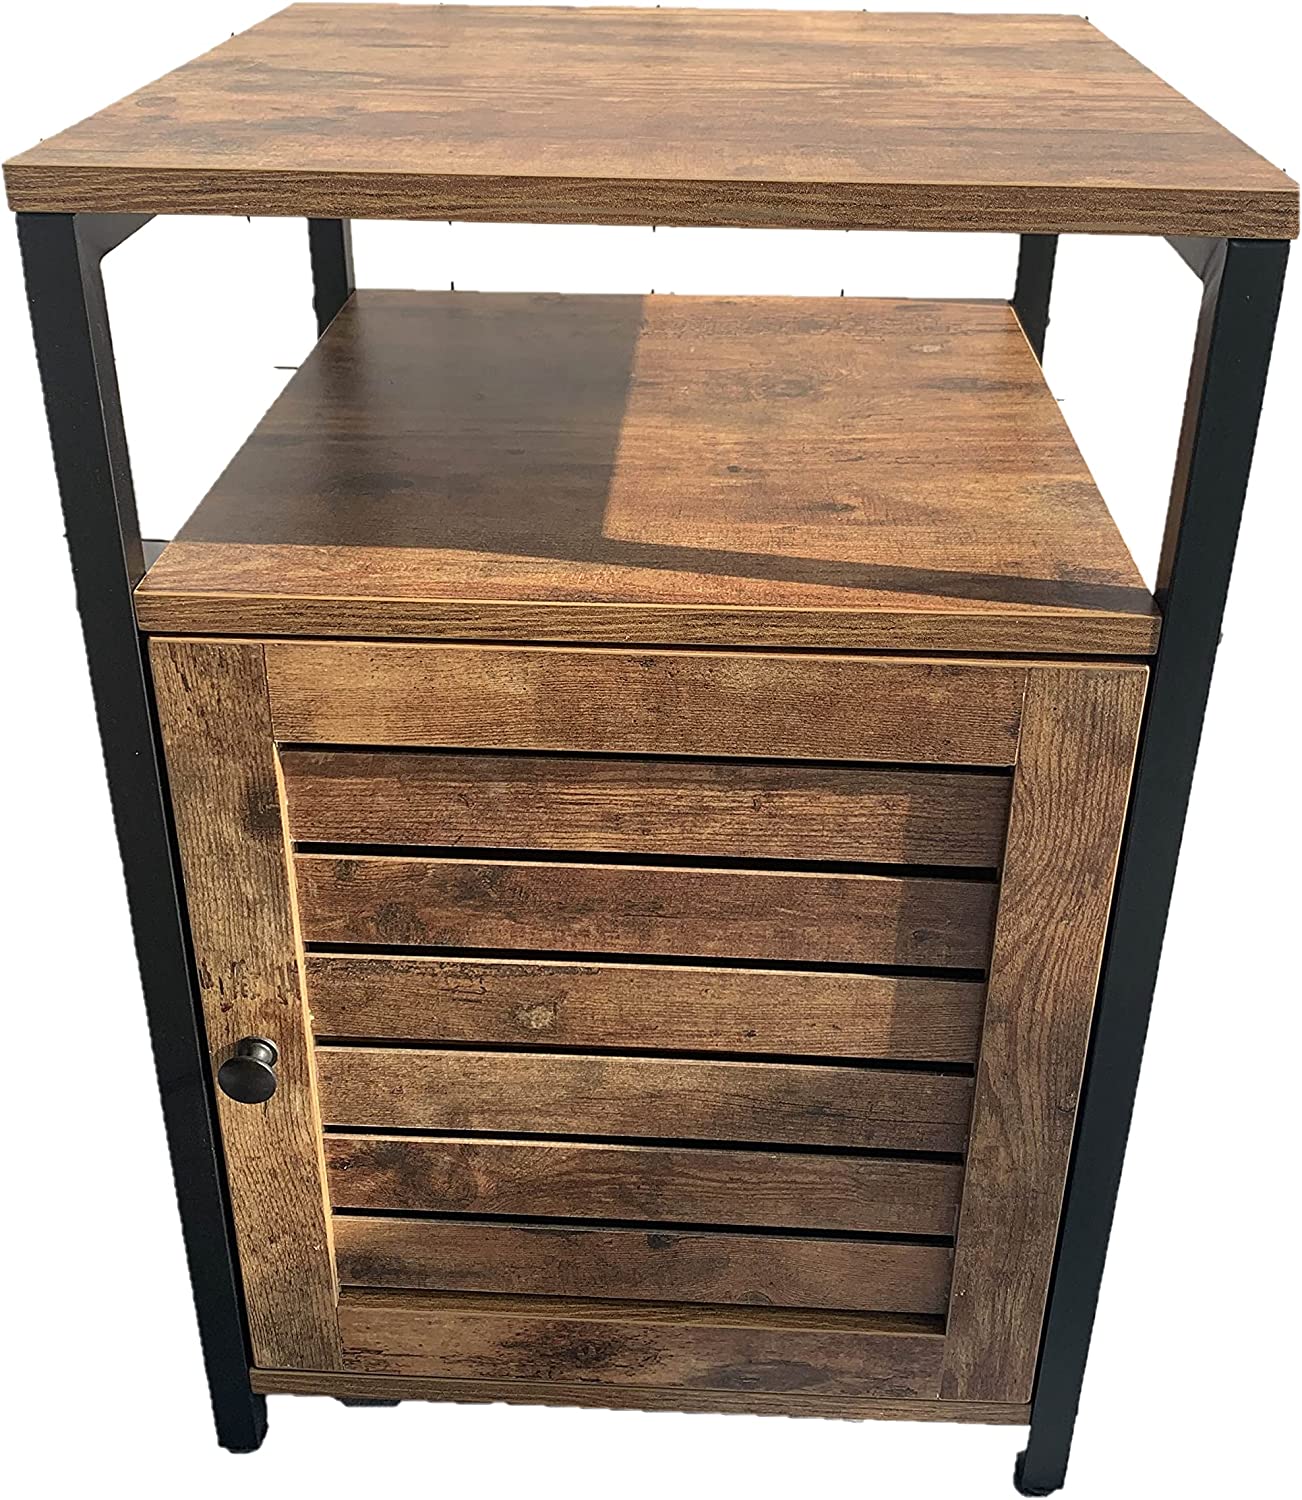 Industrial Style Wooden/Steel Rustic Bedside End Table Nightstand Shelf Cabinet With Shutter Door HYGRAD BUILT TO SURVIVE